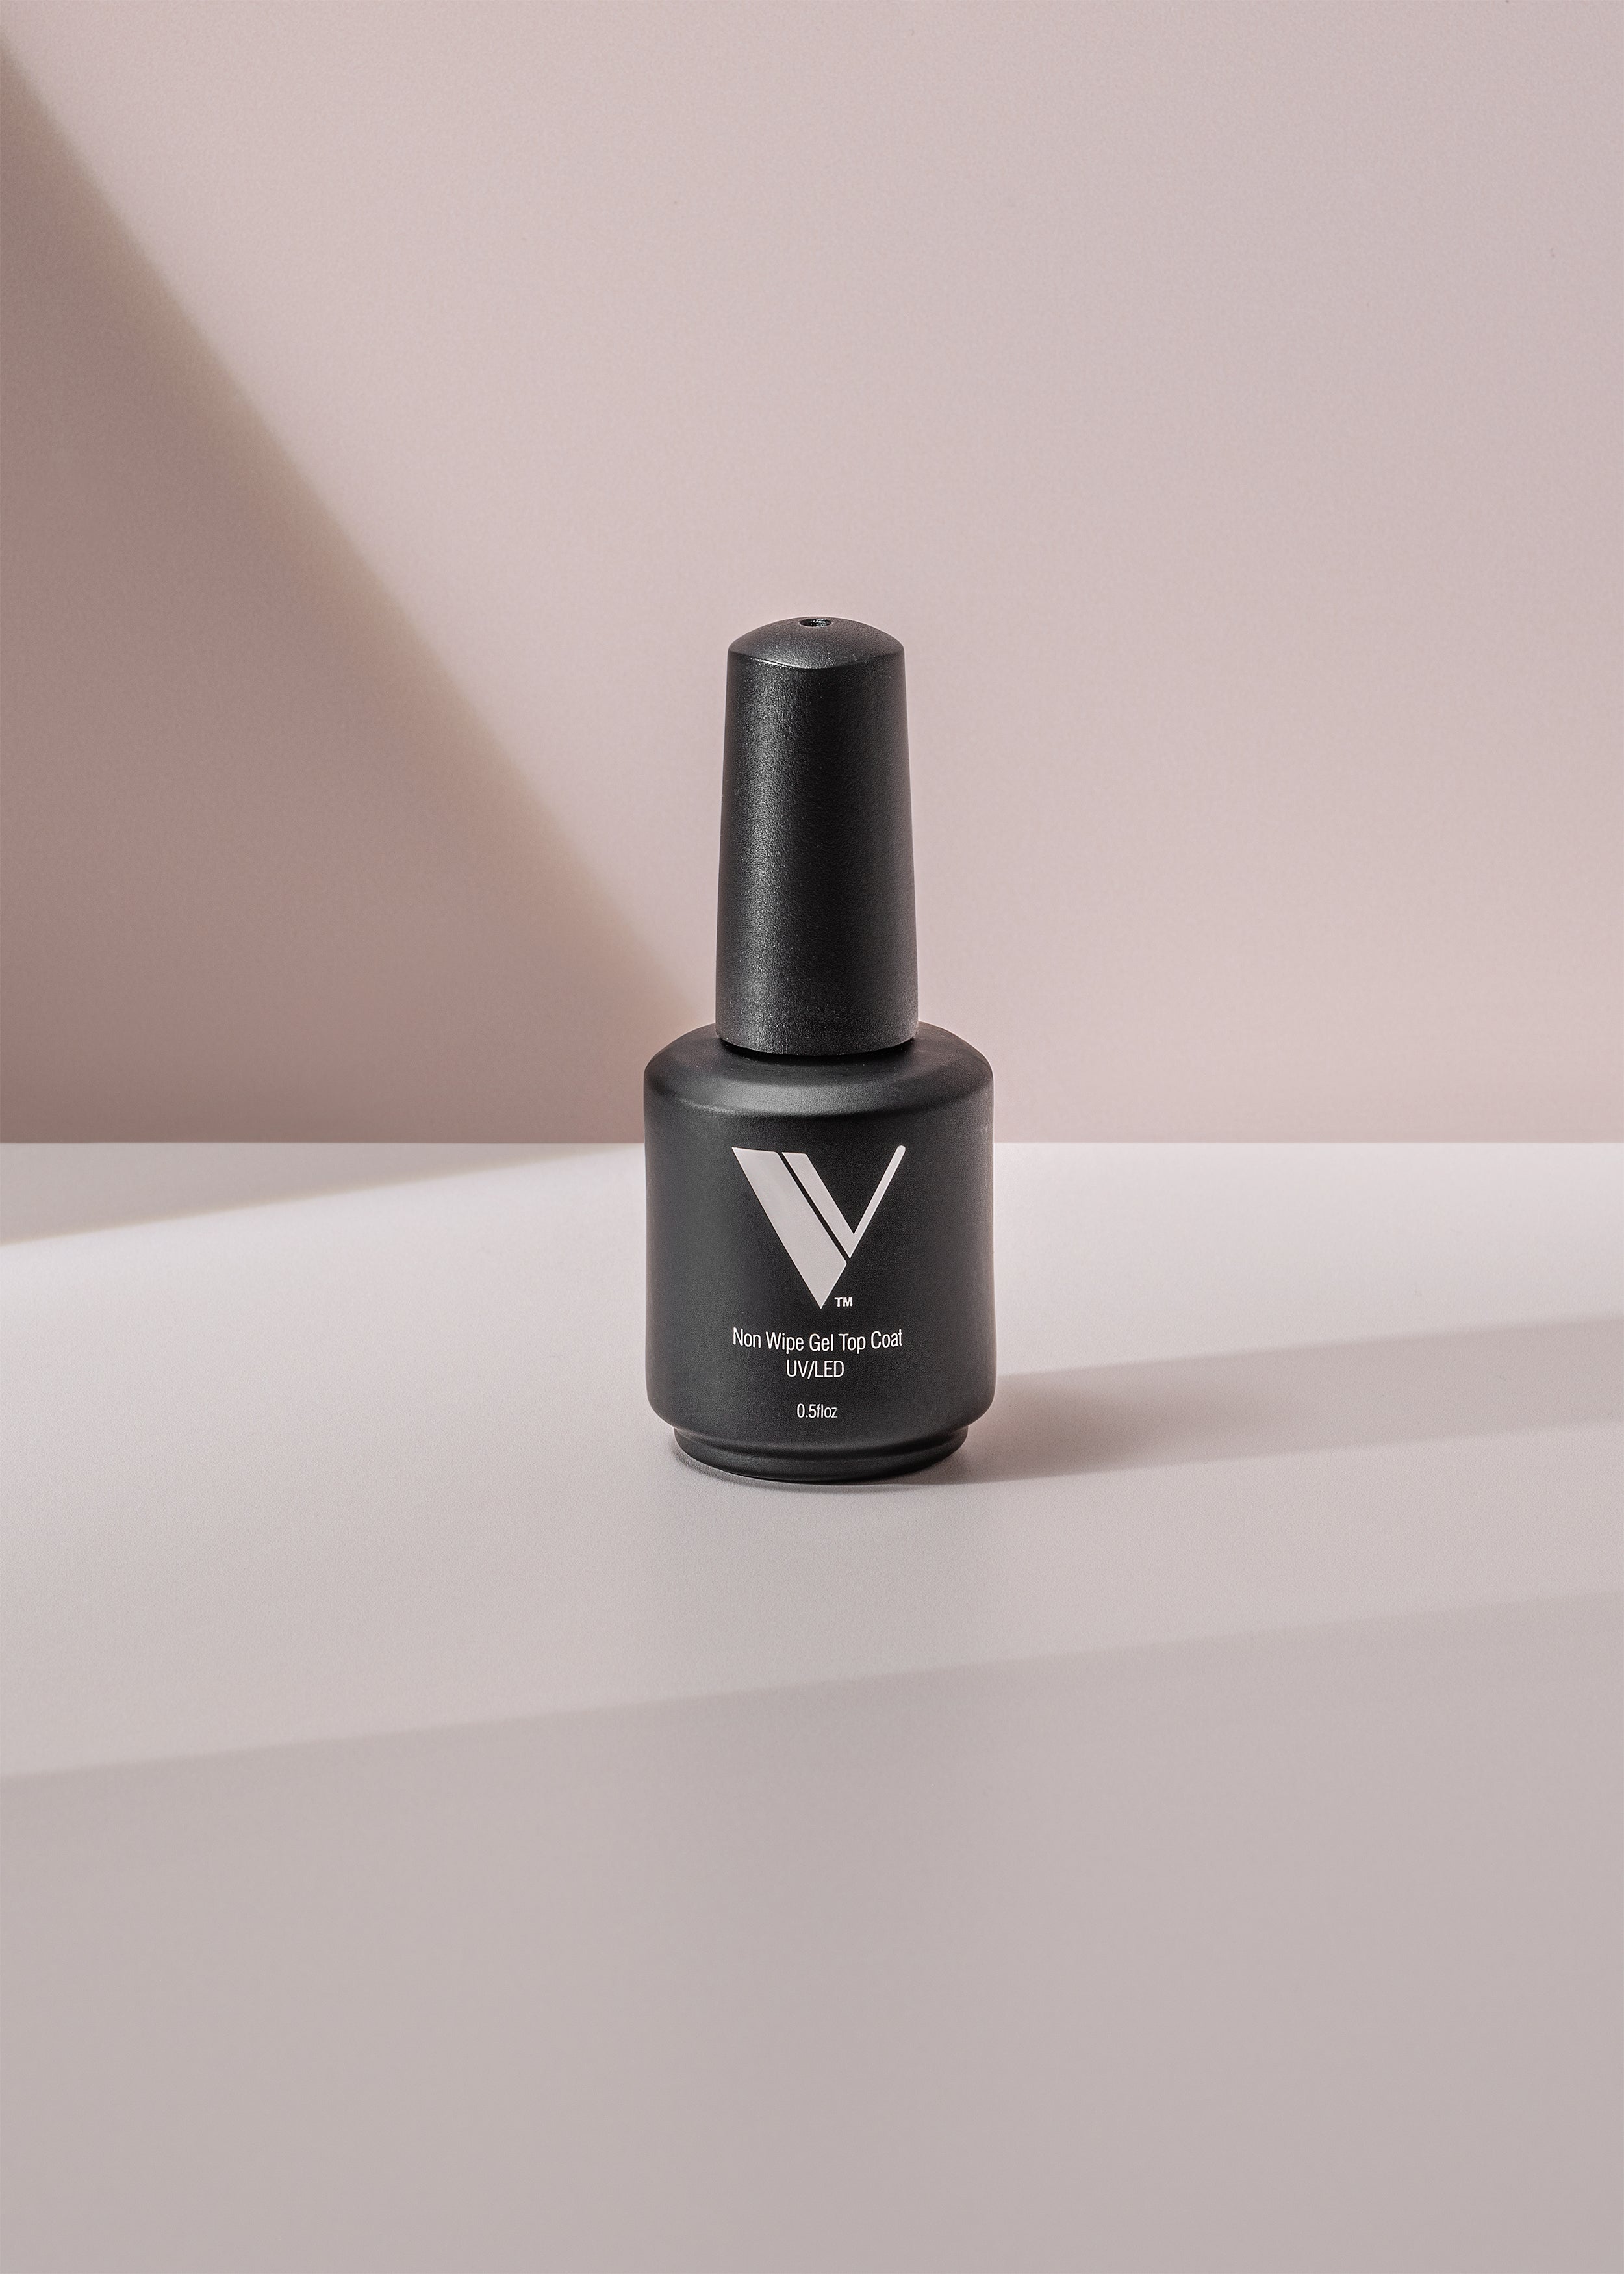 Seche Vite Dry Fast Top Coat Review: My Secret to a Fast Manicure